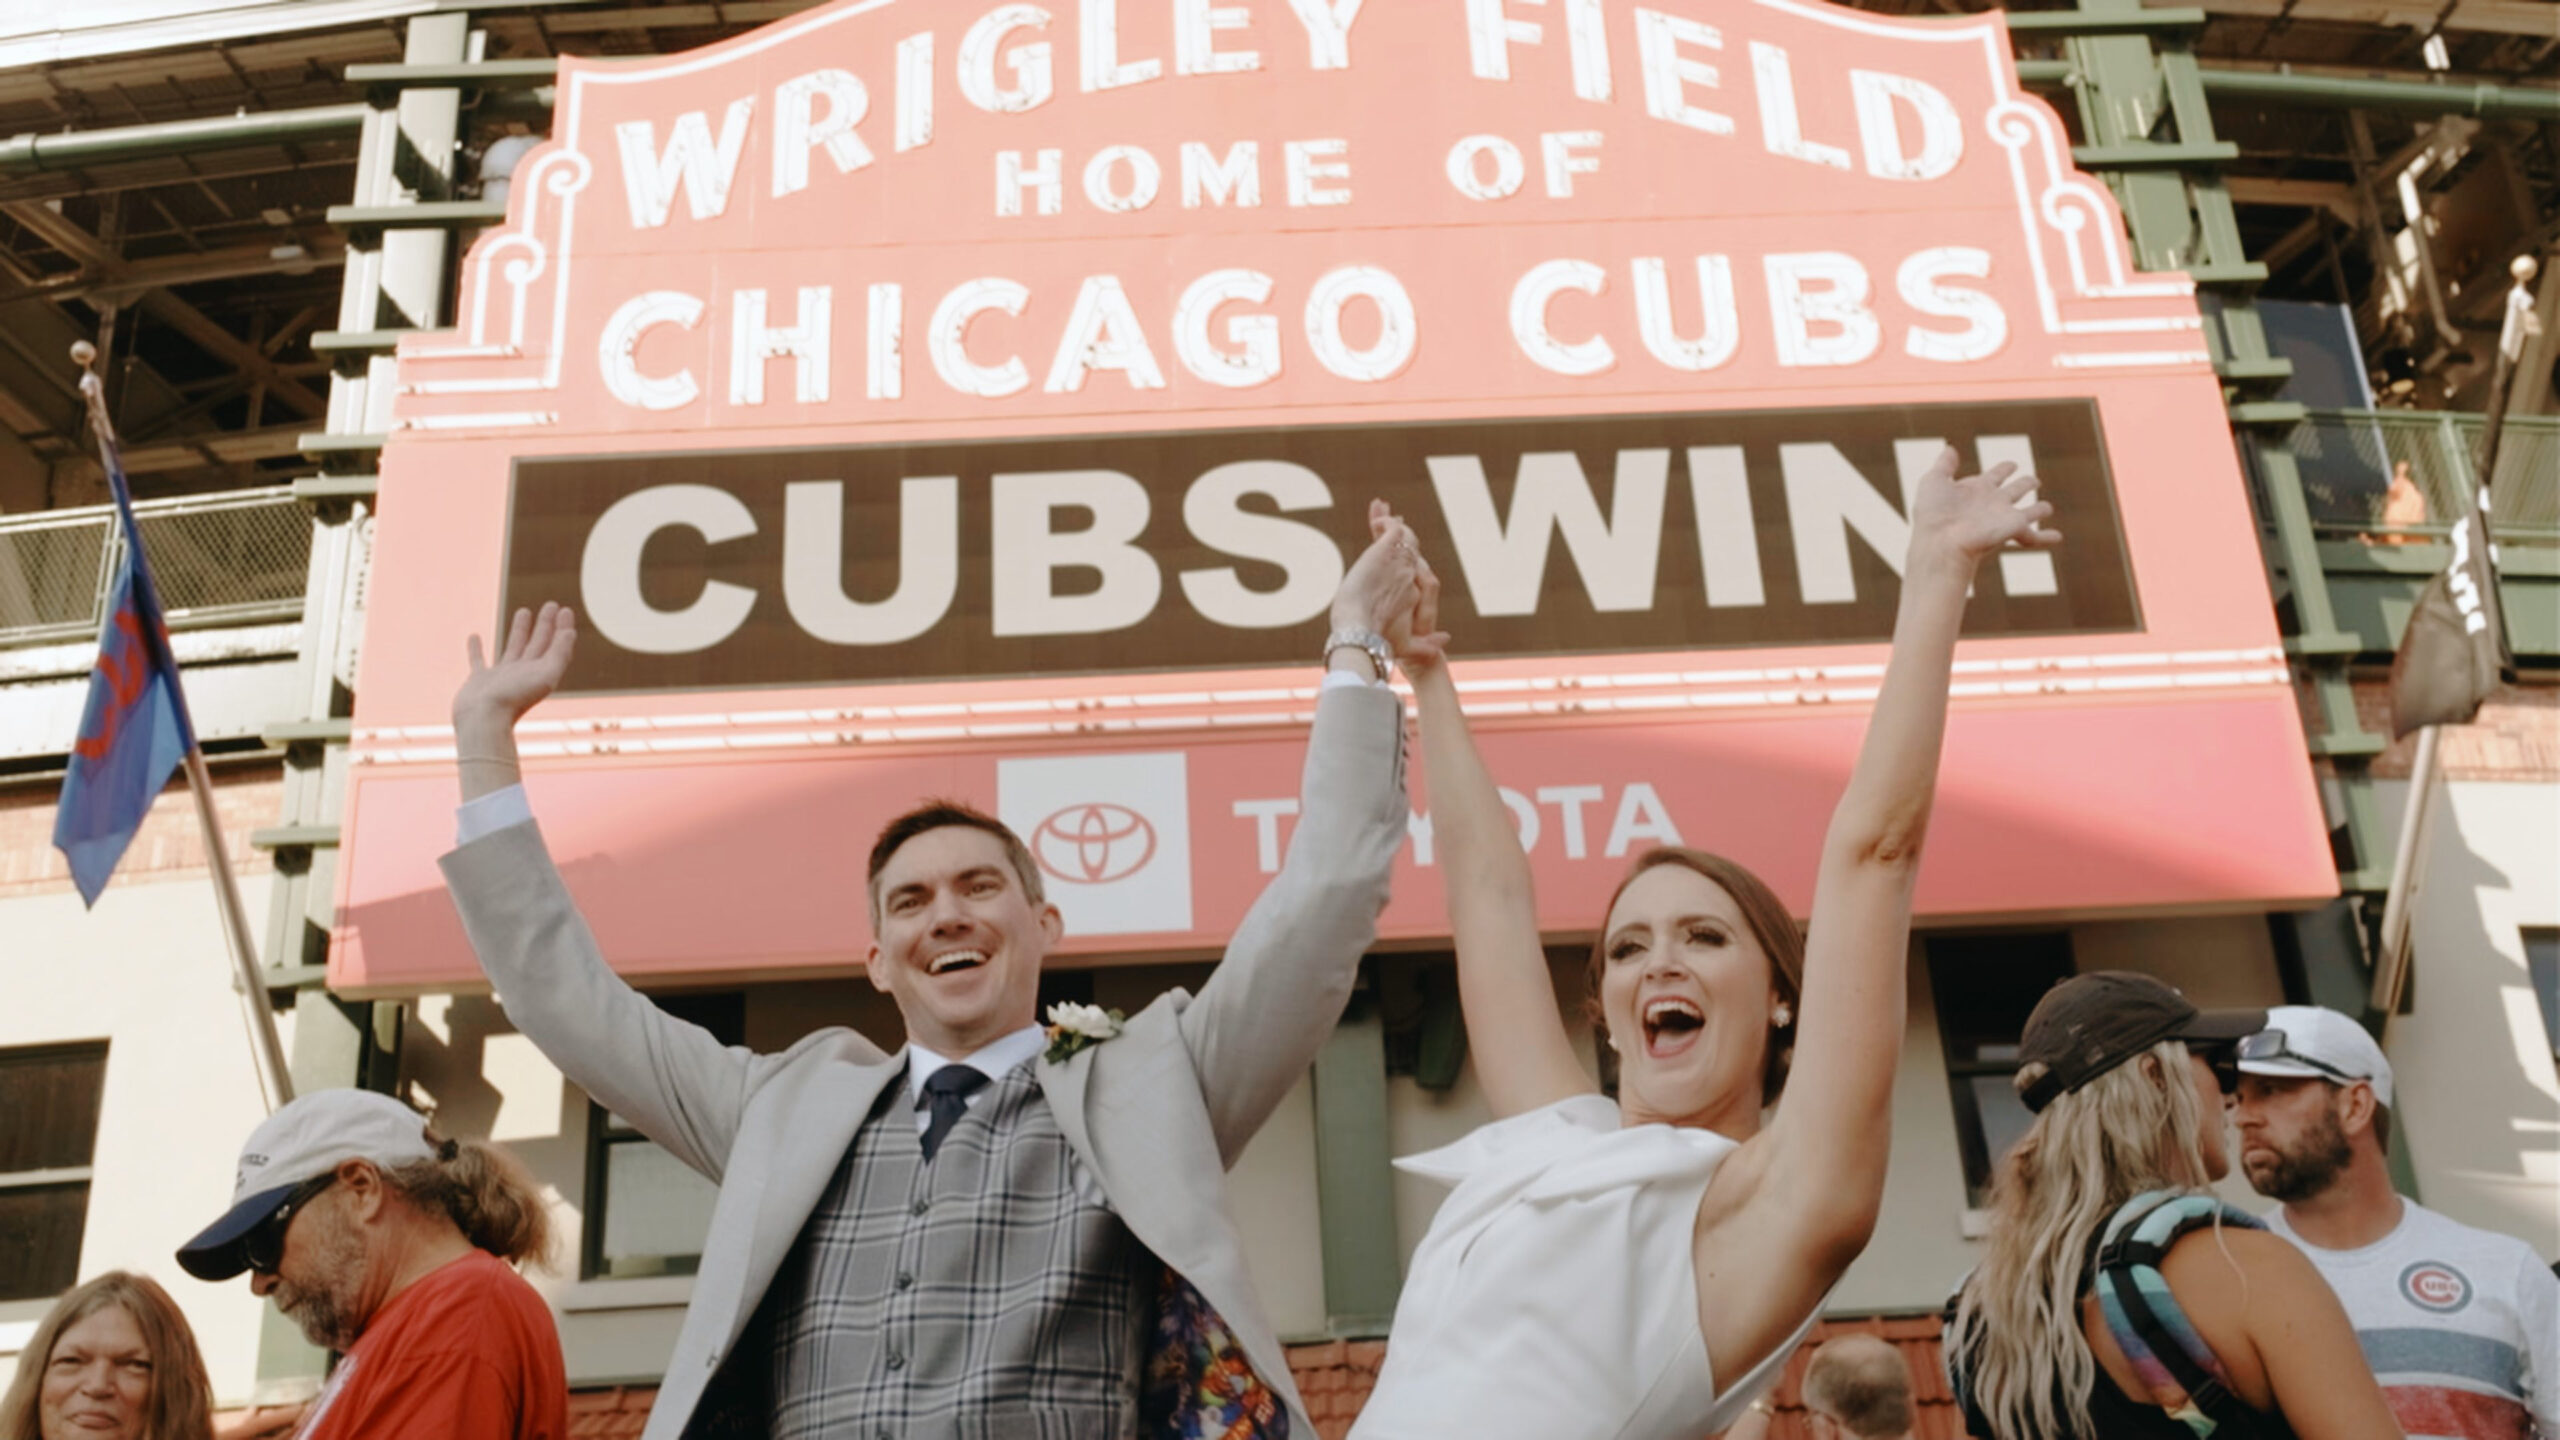 a bride and groom hold hands and toss them in the air in celebration in front of the wrigley field sign that reads "Cubs Win!" - a biagio events wedding